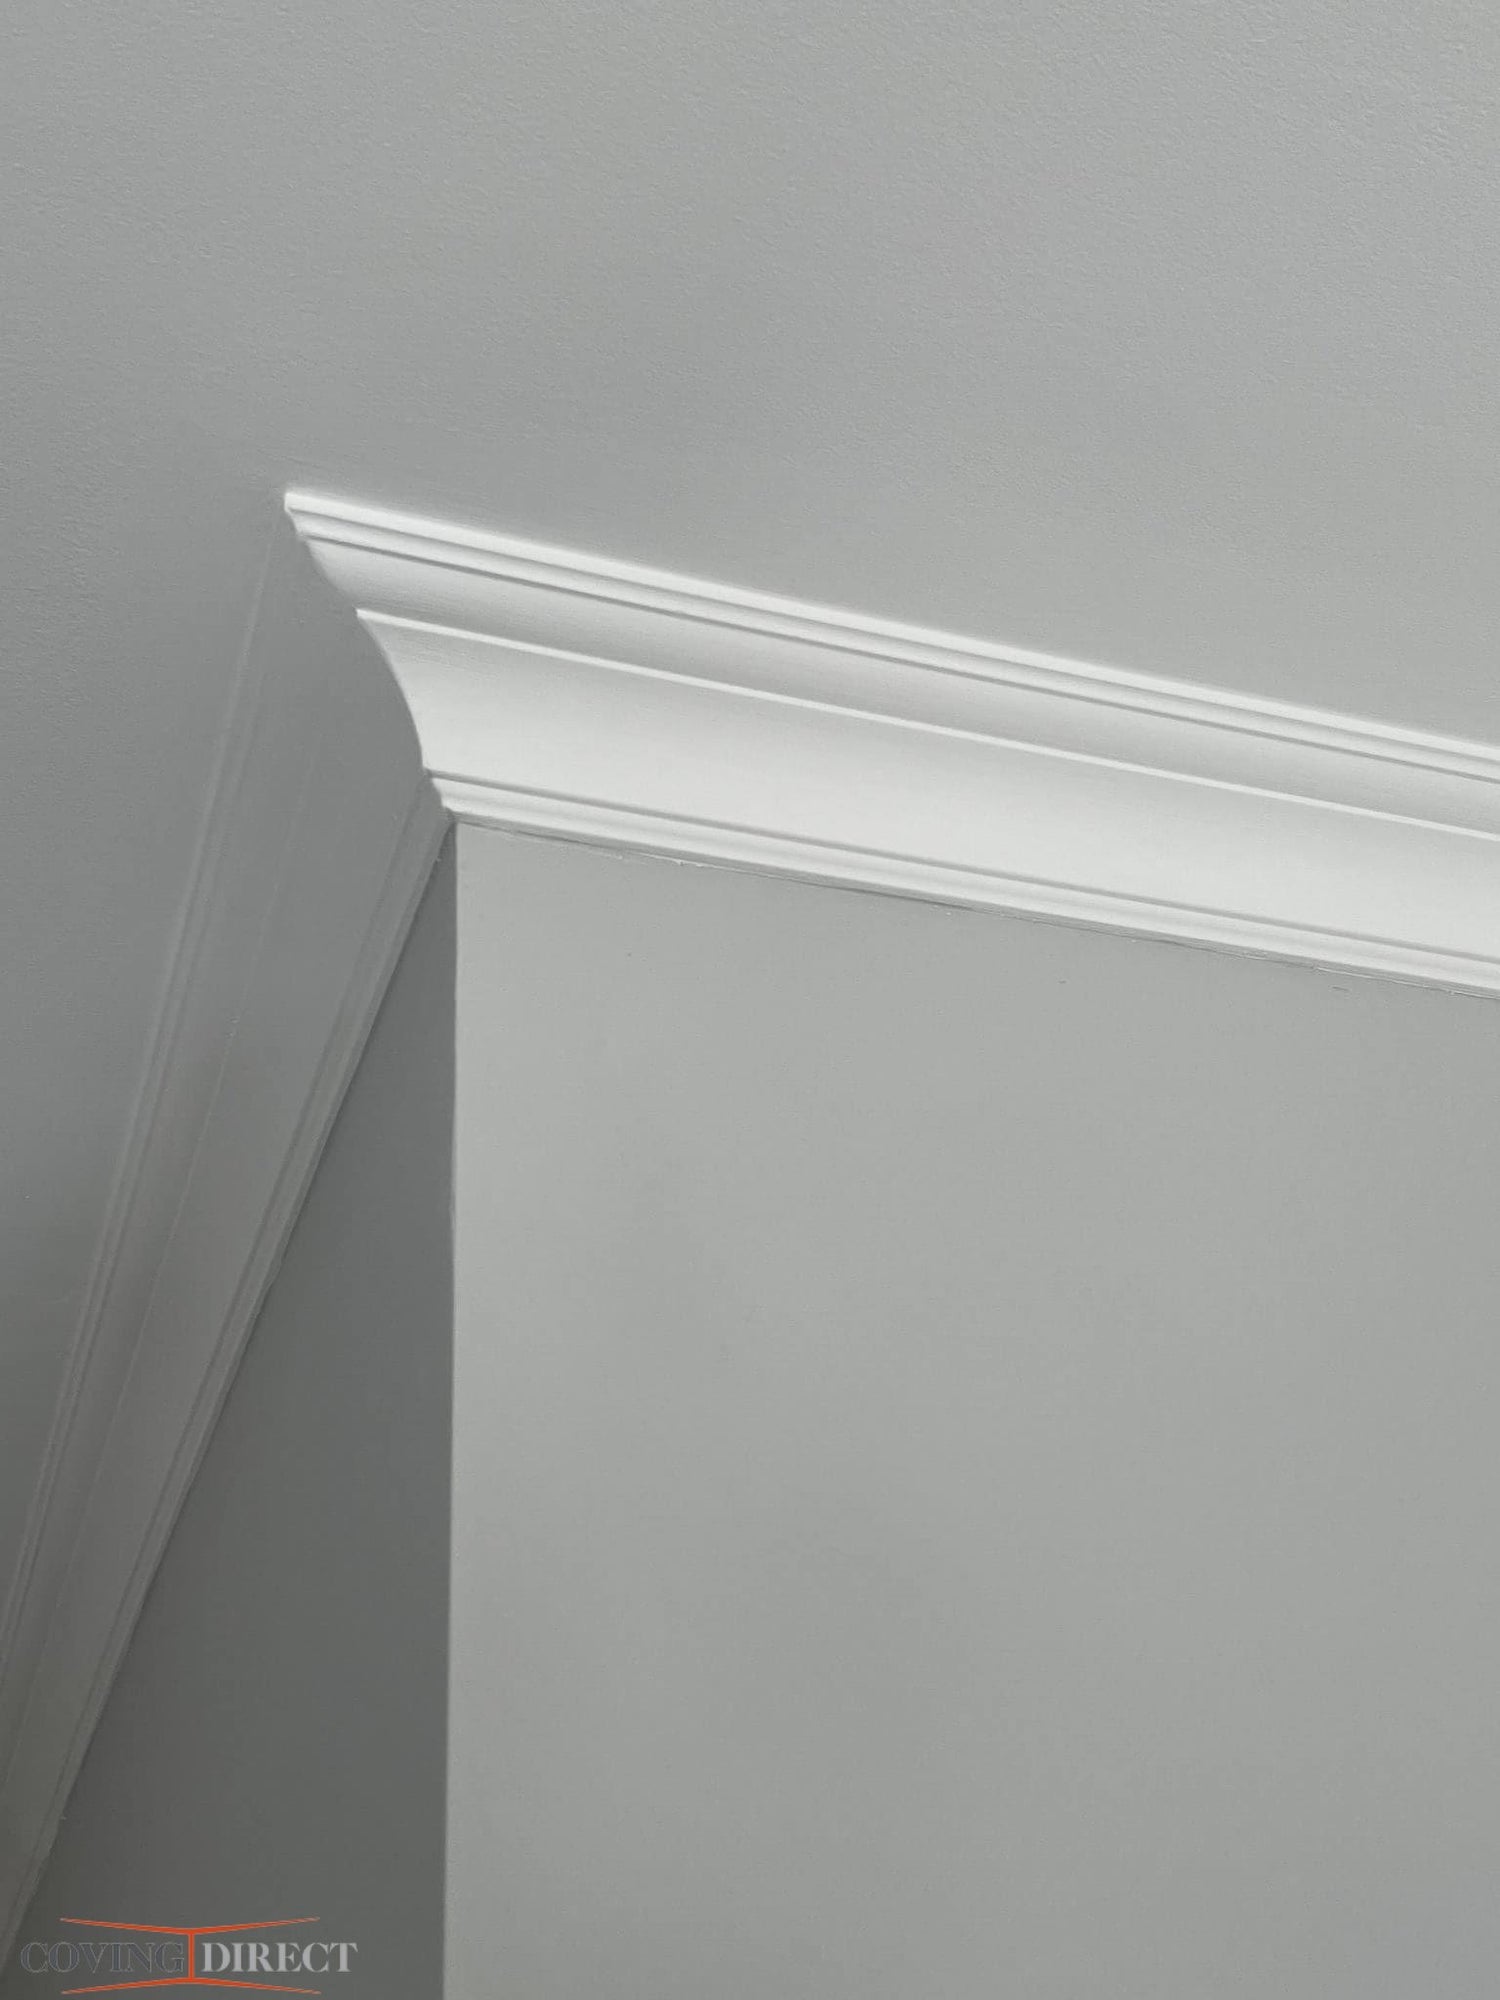 An installed MD367 - Lightweight Coving